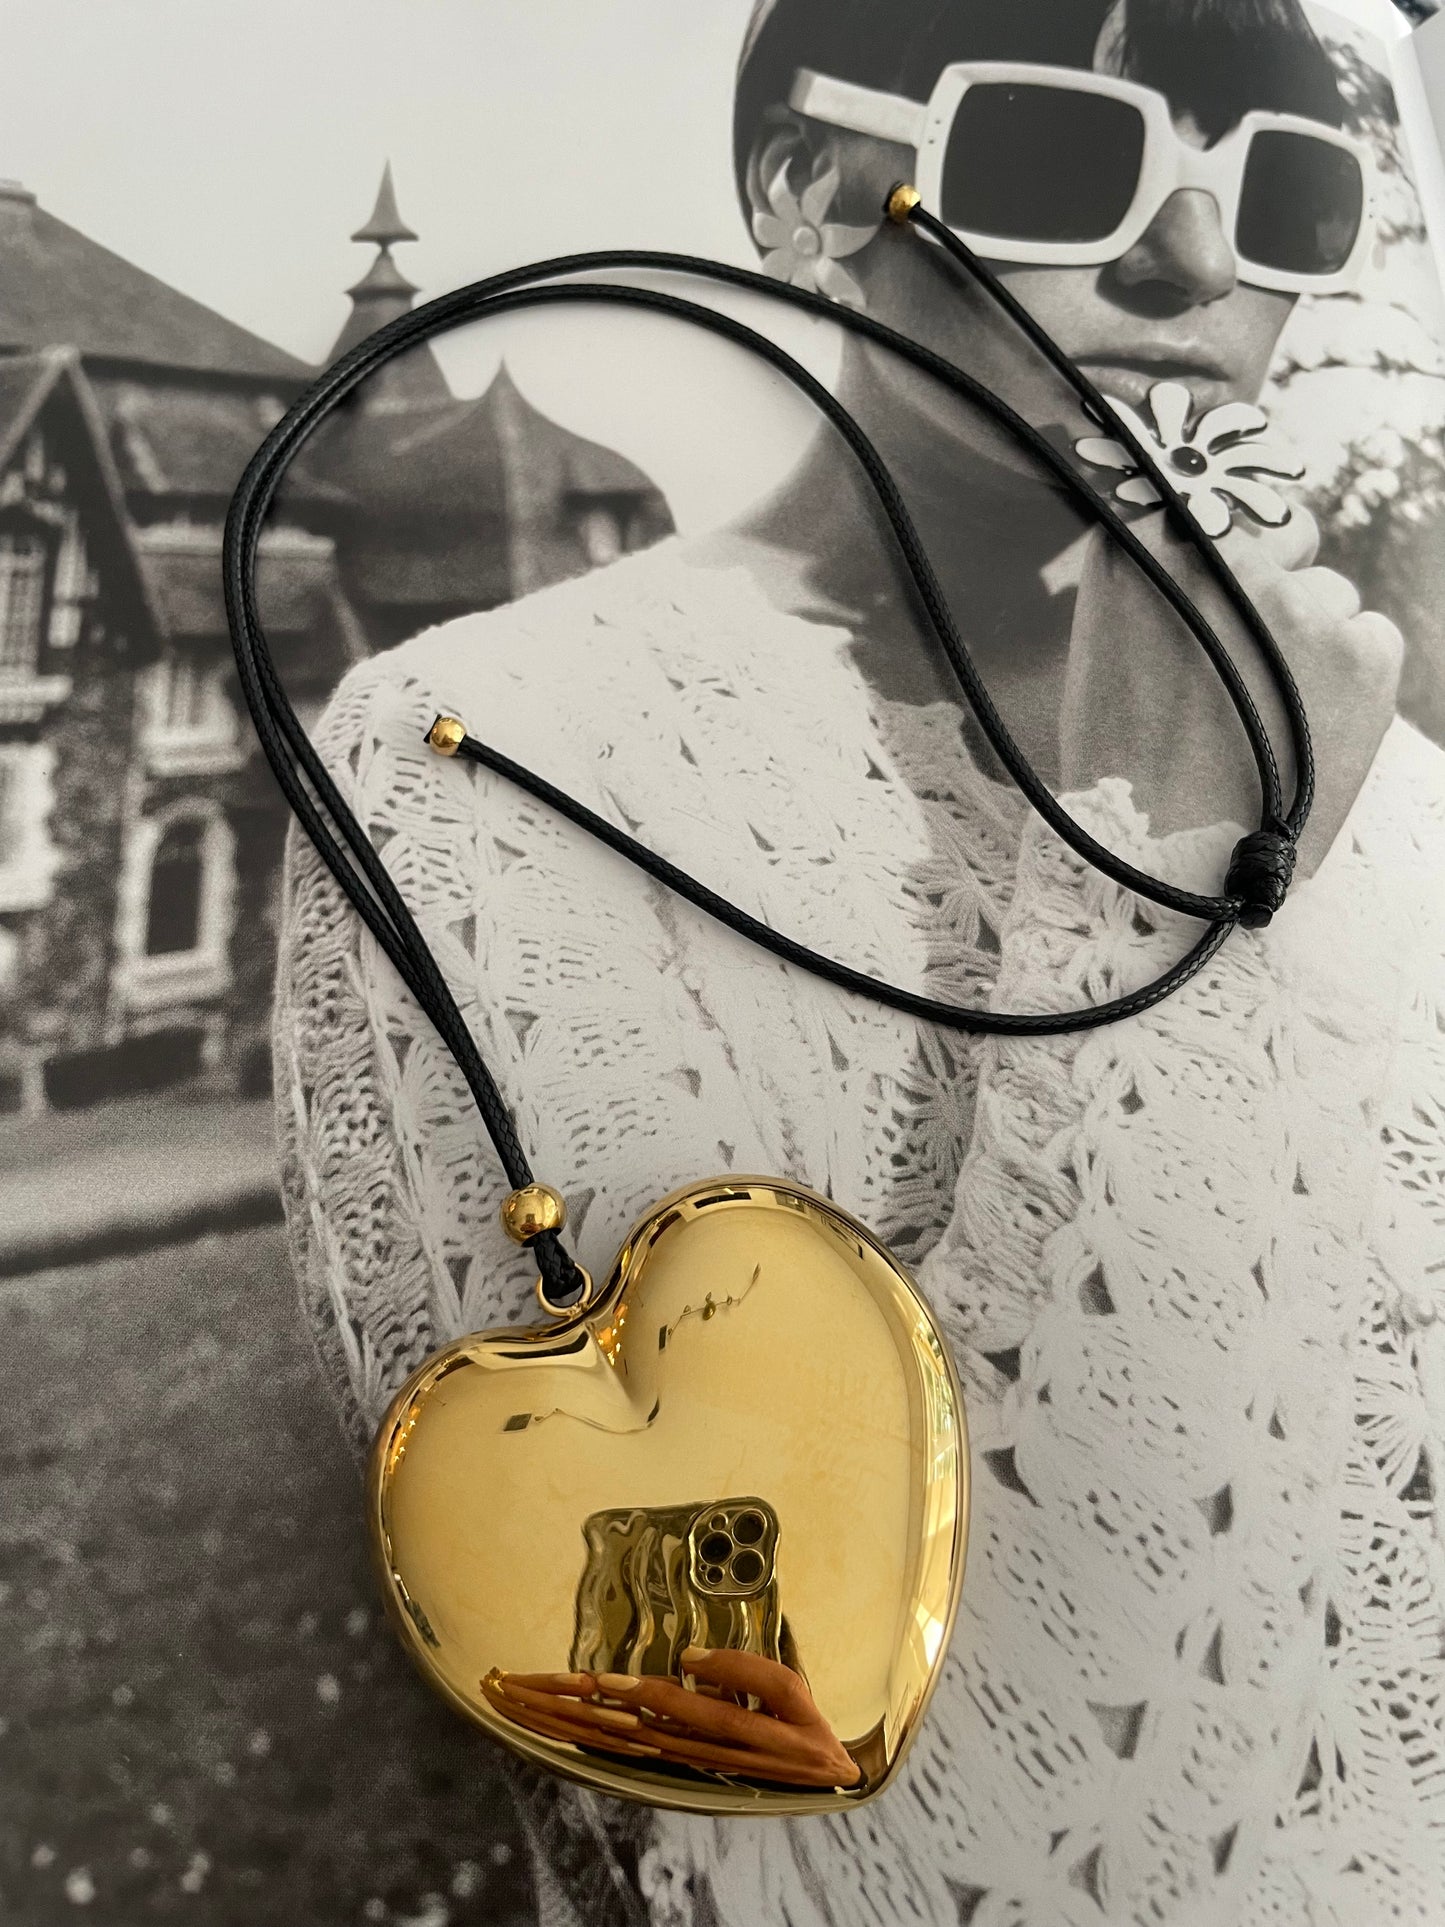 The Golden Heart Necklace